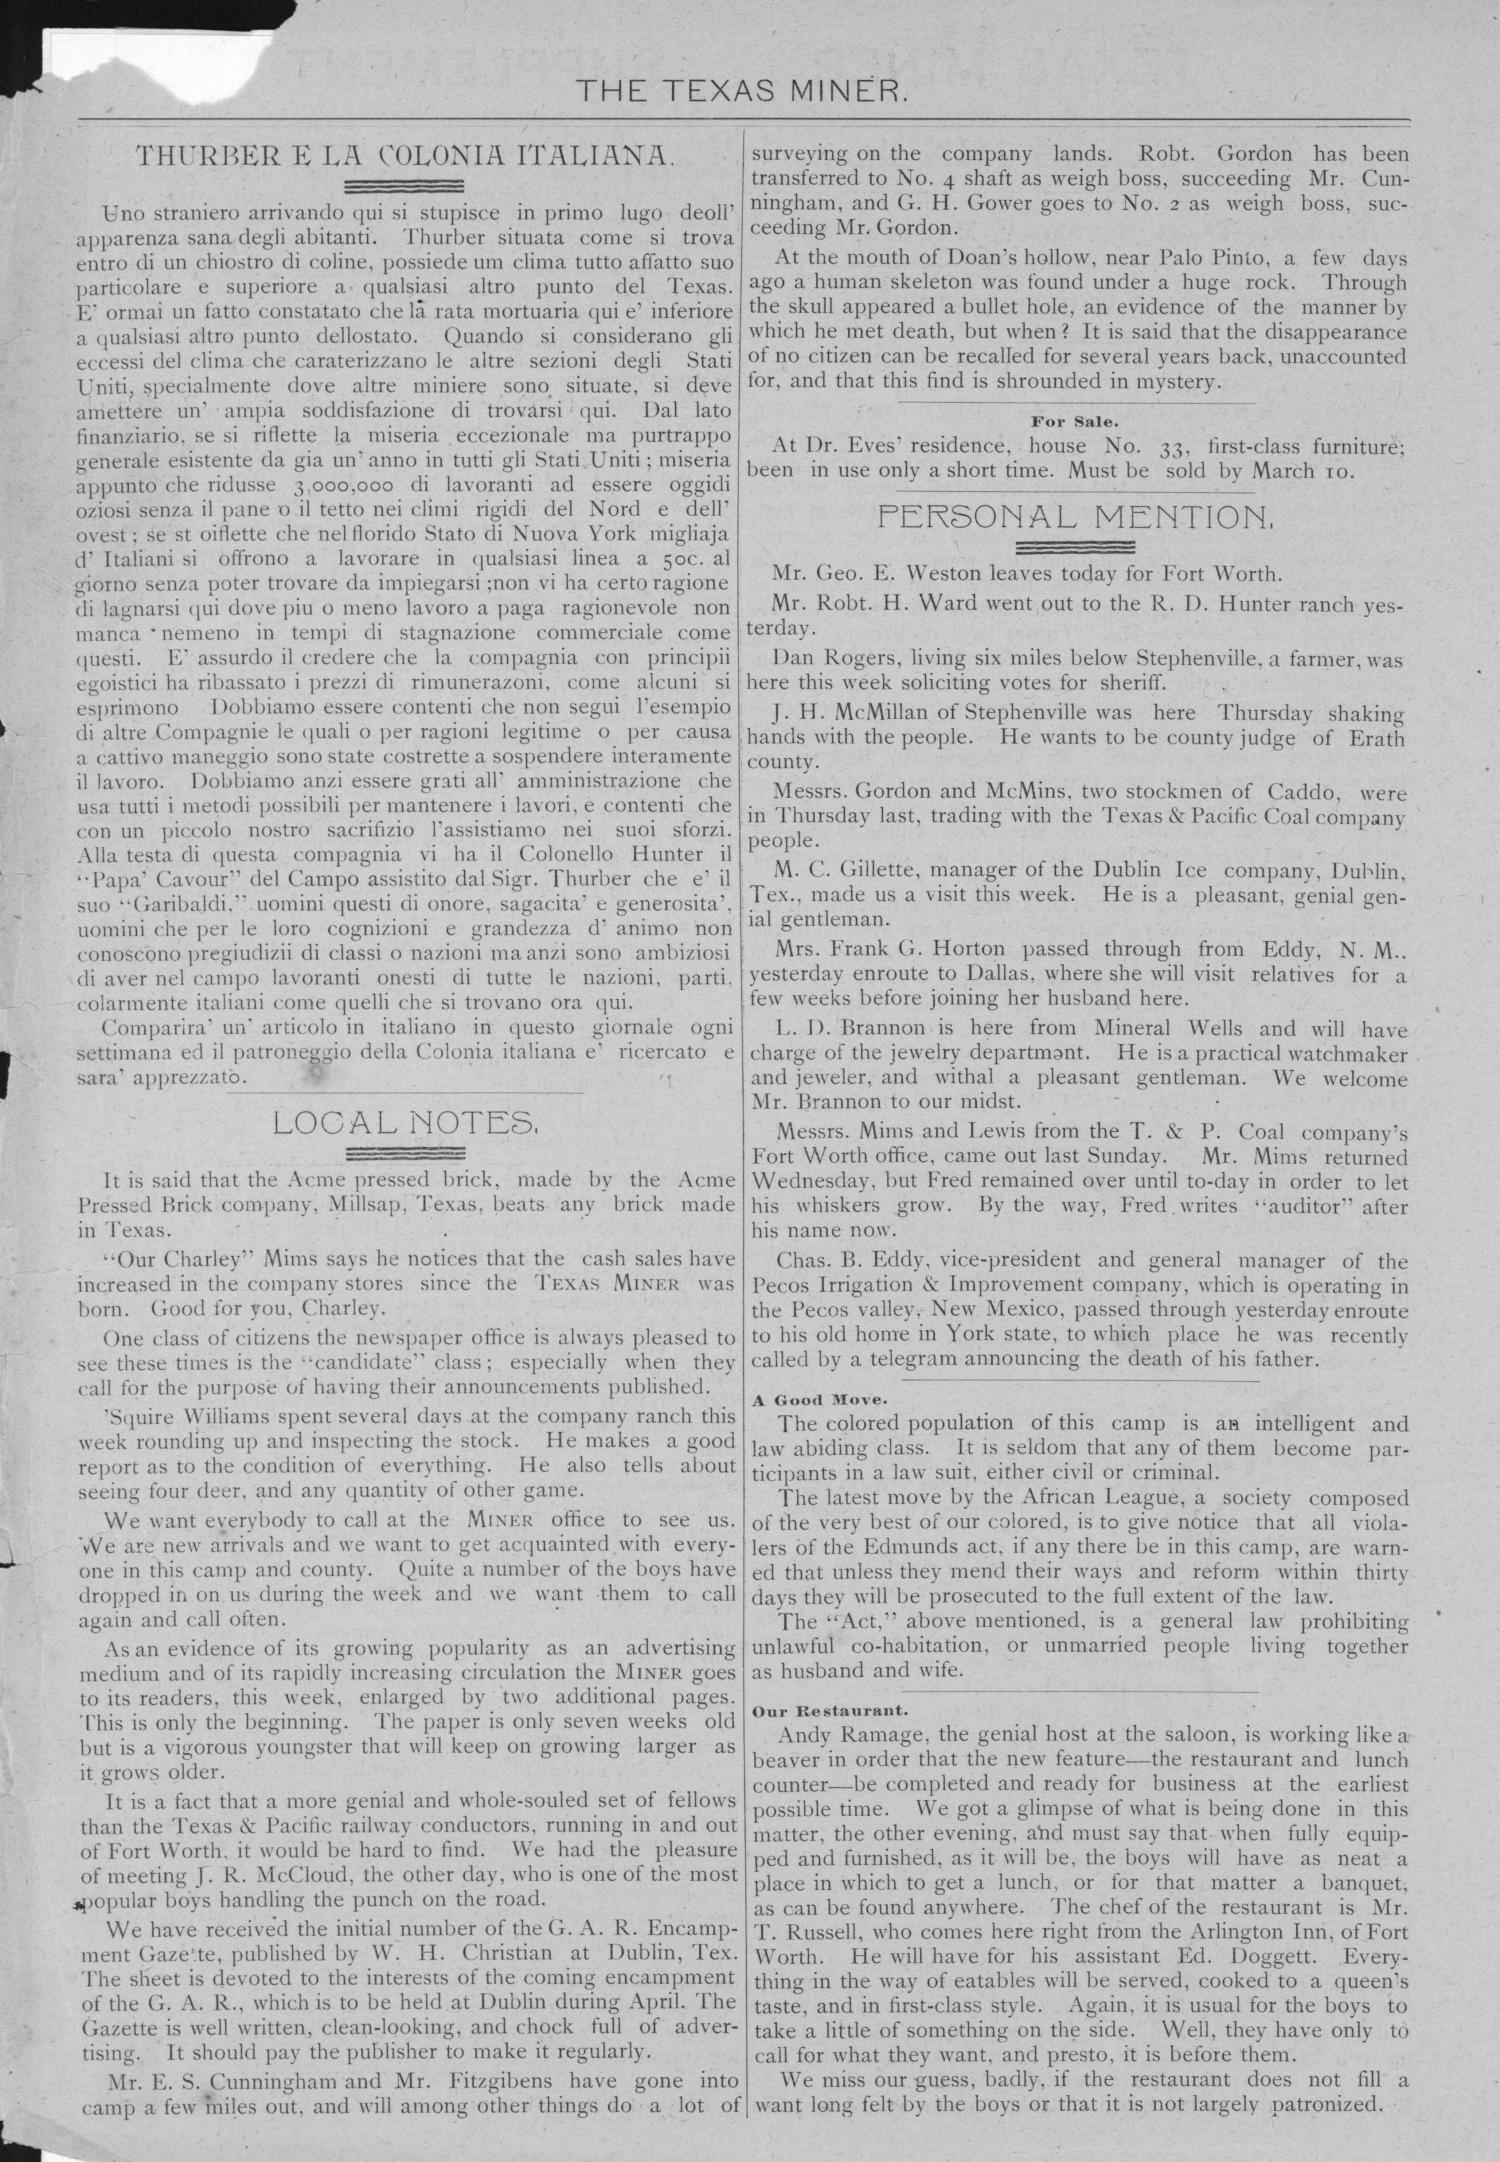 The Texas Miner, Volume 1, Number 7, March 3, 1894
                                                
                                                    None
                                                